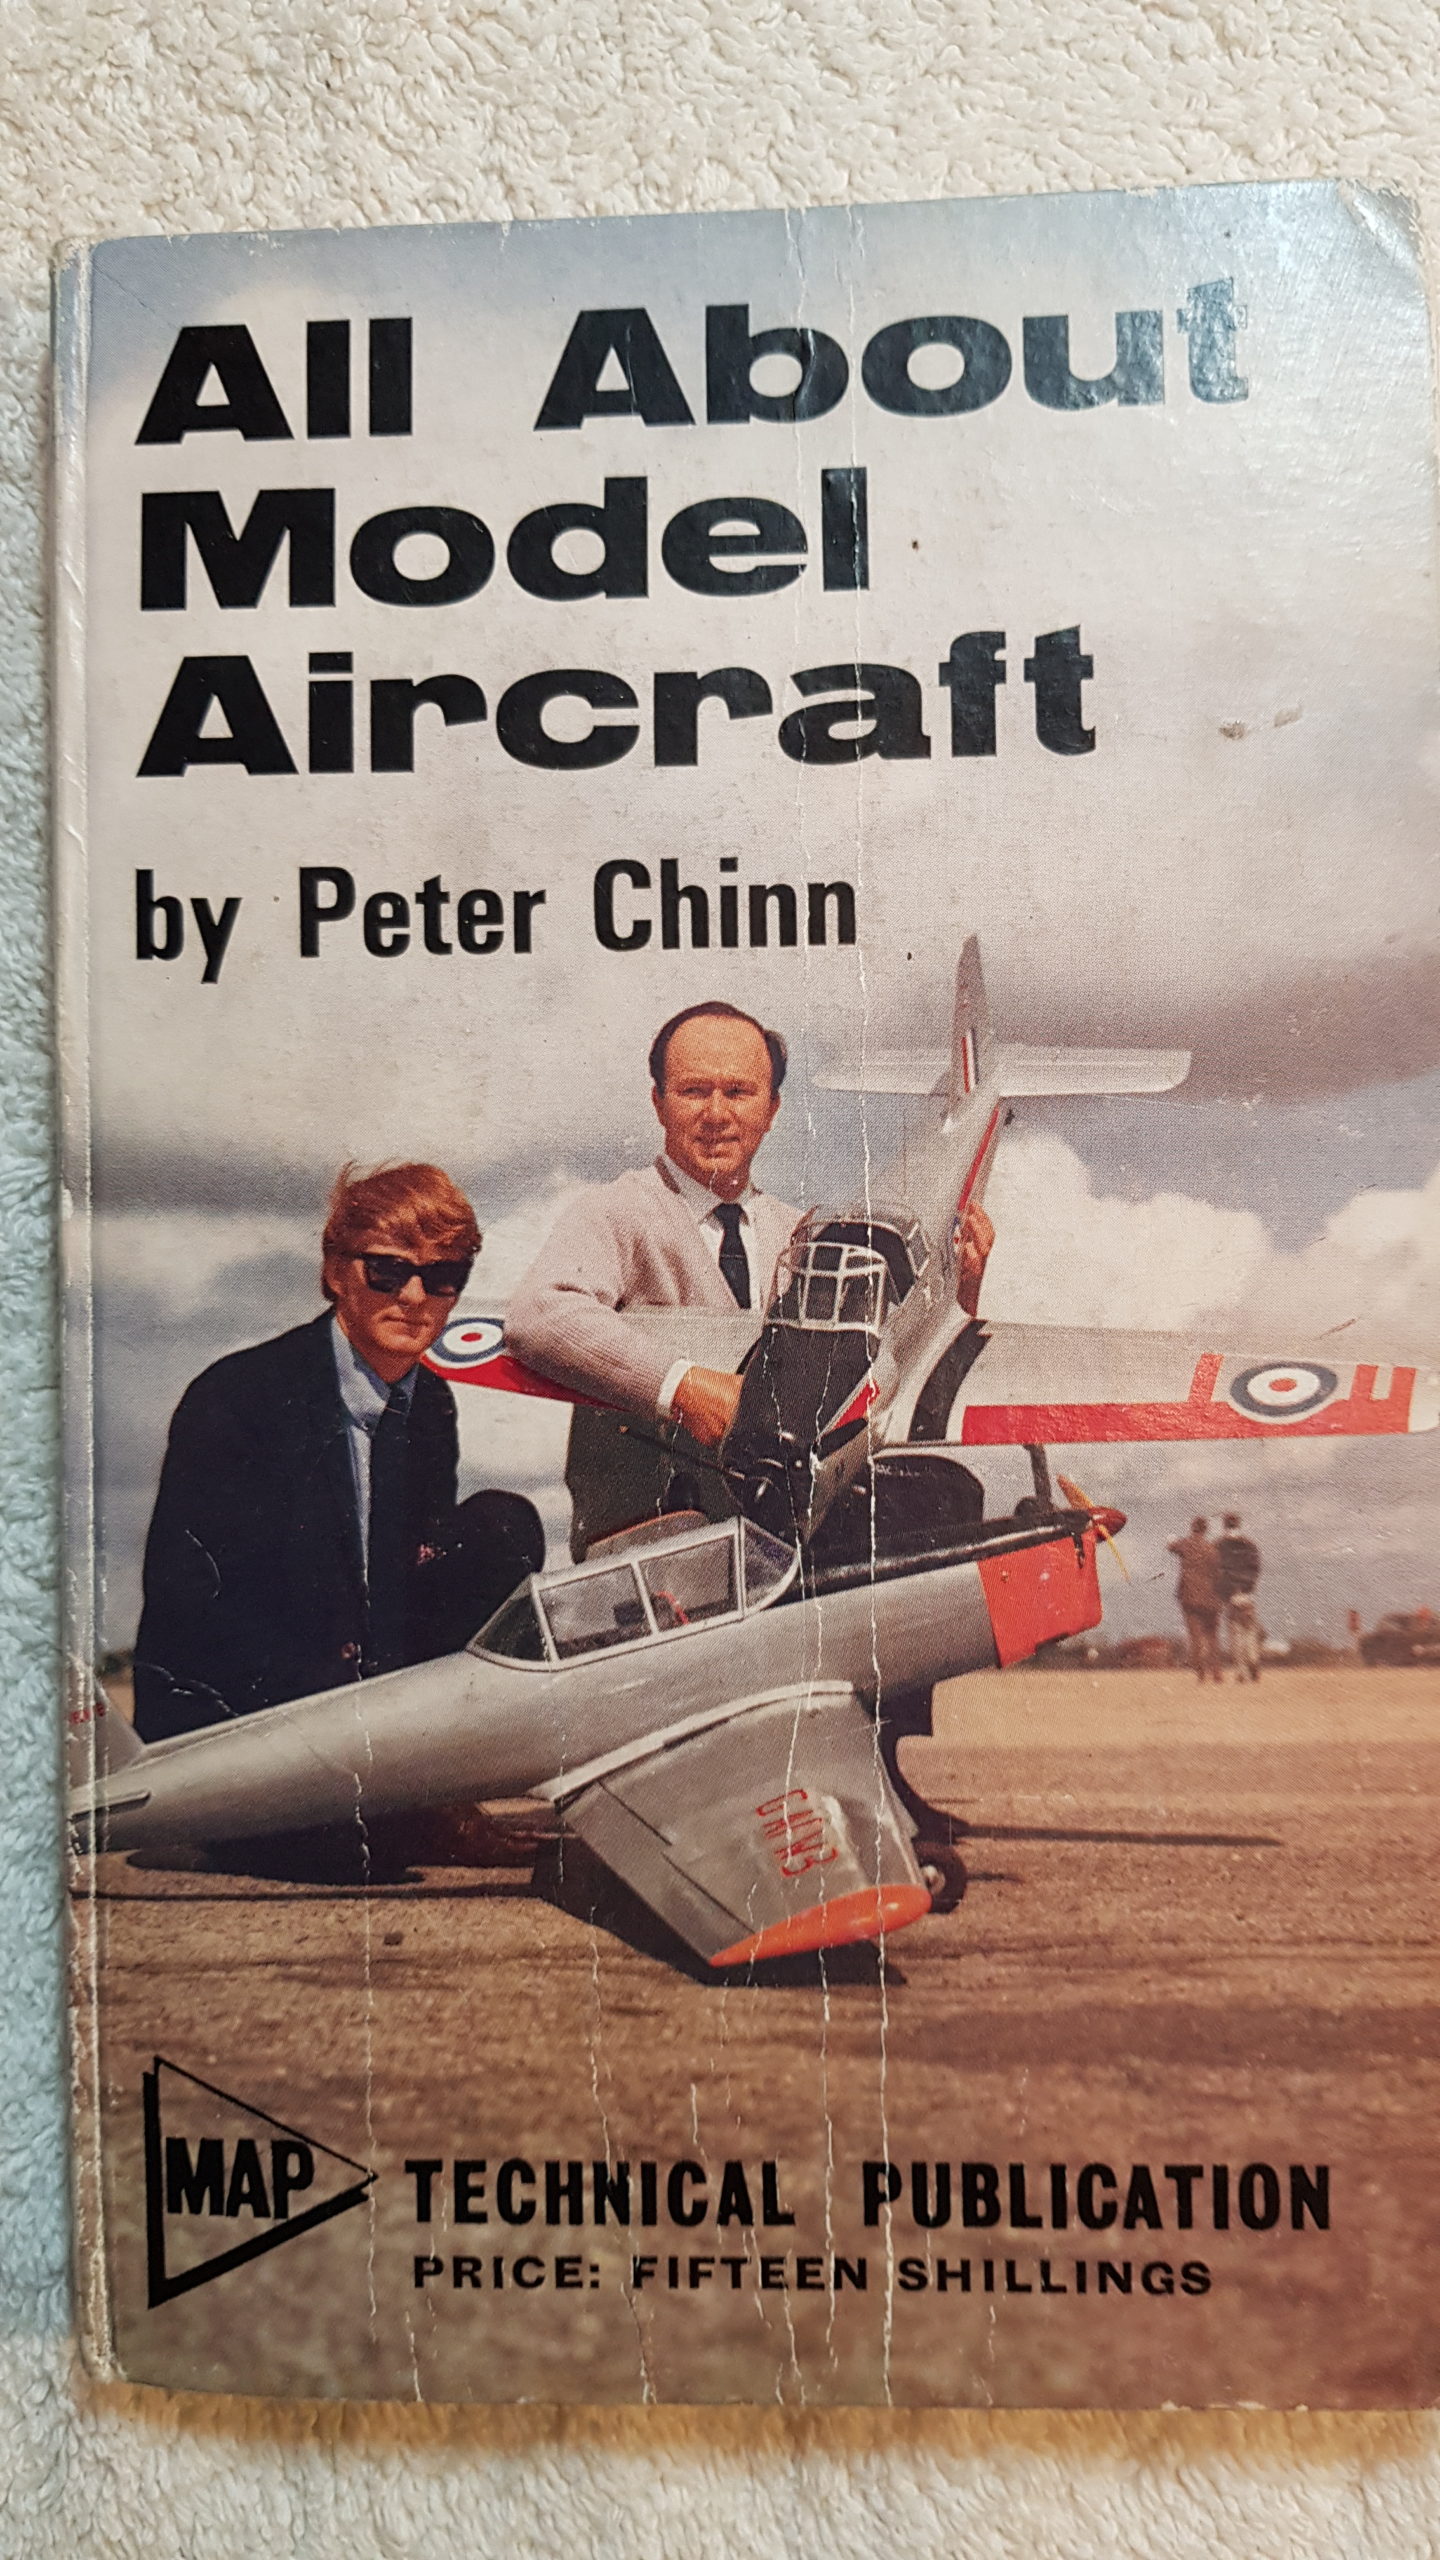 All About Model Aircraft by Peter Chinn